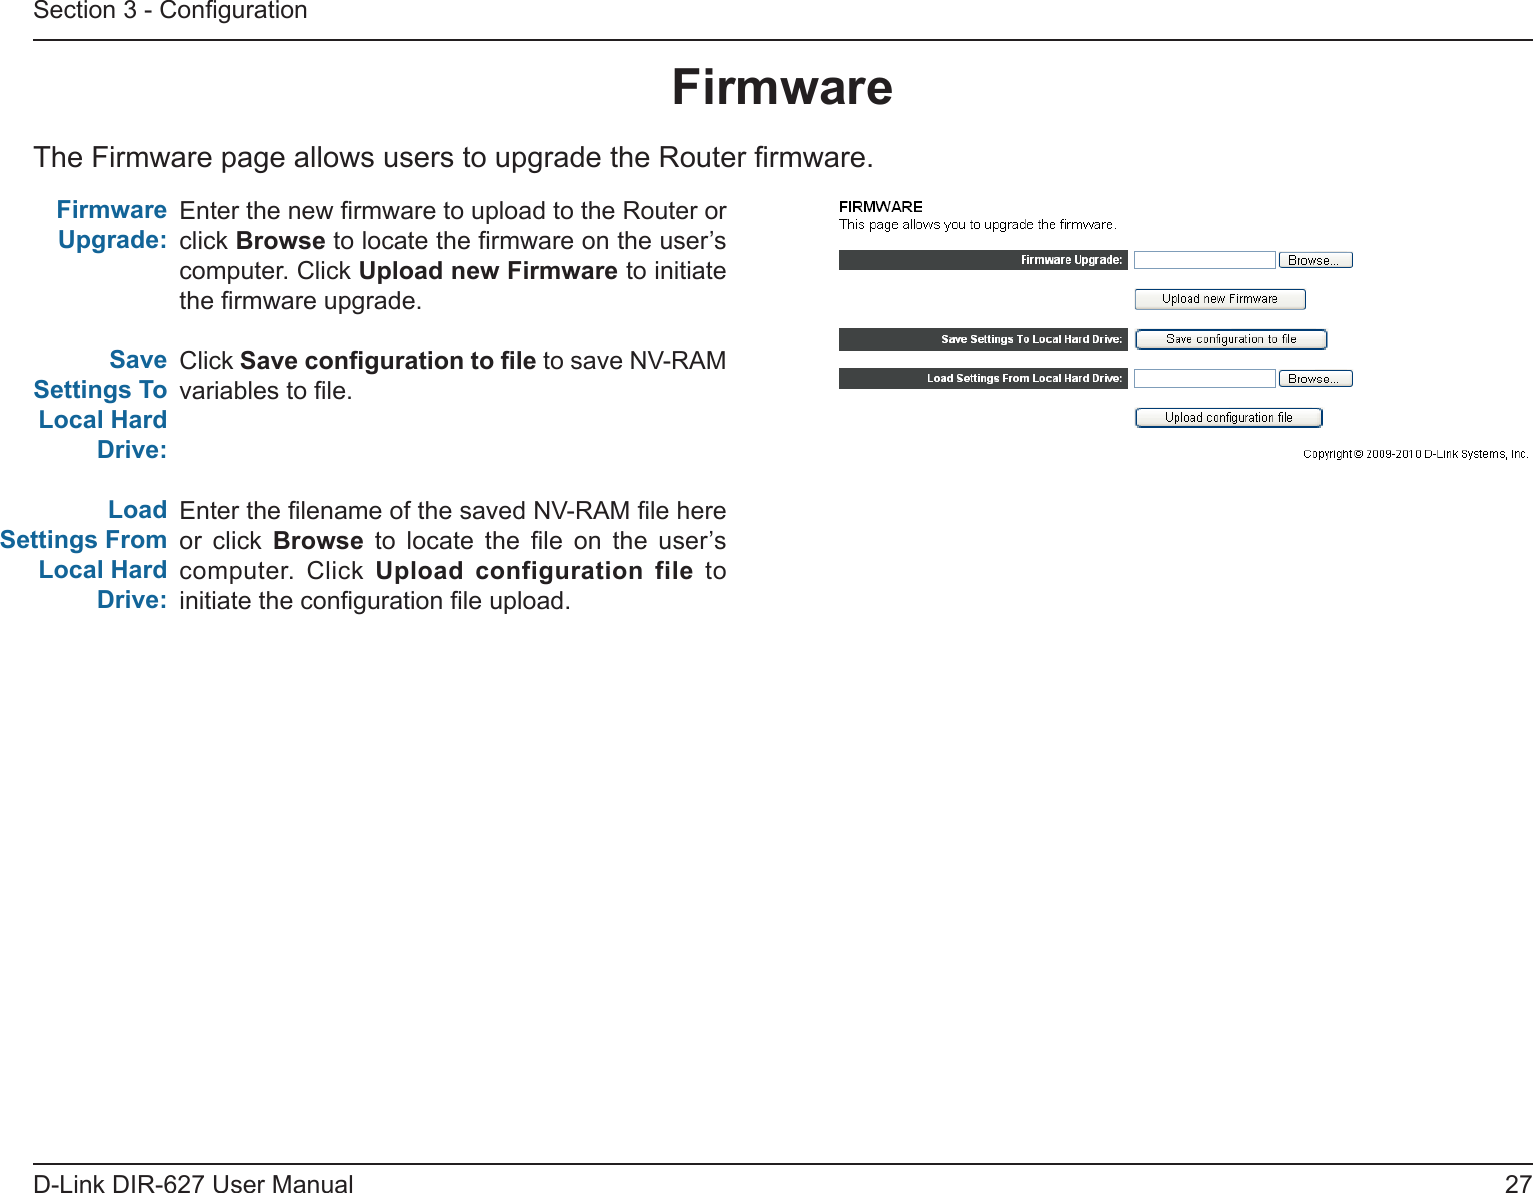 27D-Link DIR-627 User ManualSection 3 - CongurationFirmwareThe Firmware page allows users to upgrade the Router rmware.Enter the new rmware to upload to the Router or click Browse to locate the rmware on the user’s computer. Click UploadnewFirmware to initiate the rmware upgrade.Click Savecongurationtole to save NV-RAM variables to le.Enter the lename of the saved NV-RAM le here or click Browse  to  locate  the  le  on  the  user’s computer.  Click  Upload configuration file to initiate the conguration le upload.FirmwareUpgrade:Save Settings To LocalHardDrive:LoadSettingsFromLocalHardDrive: 